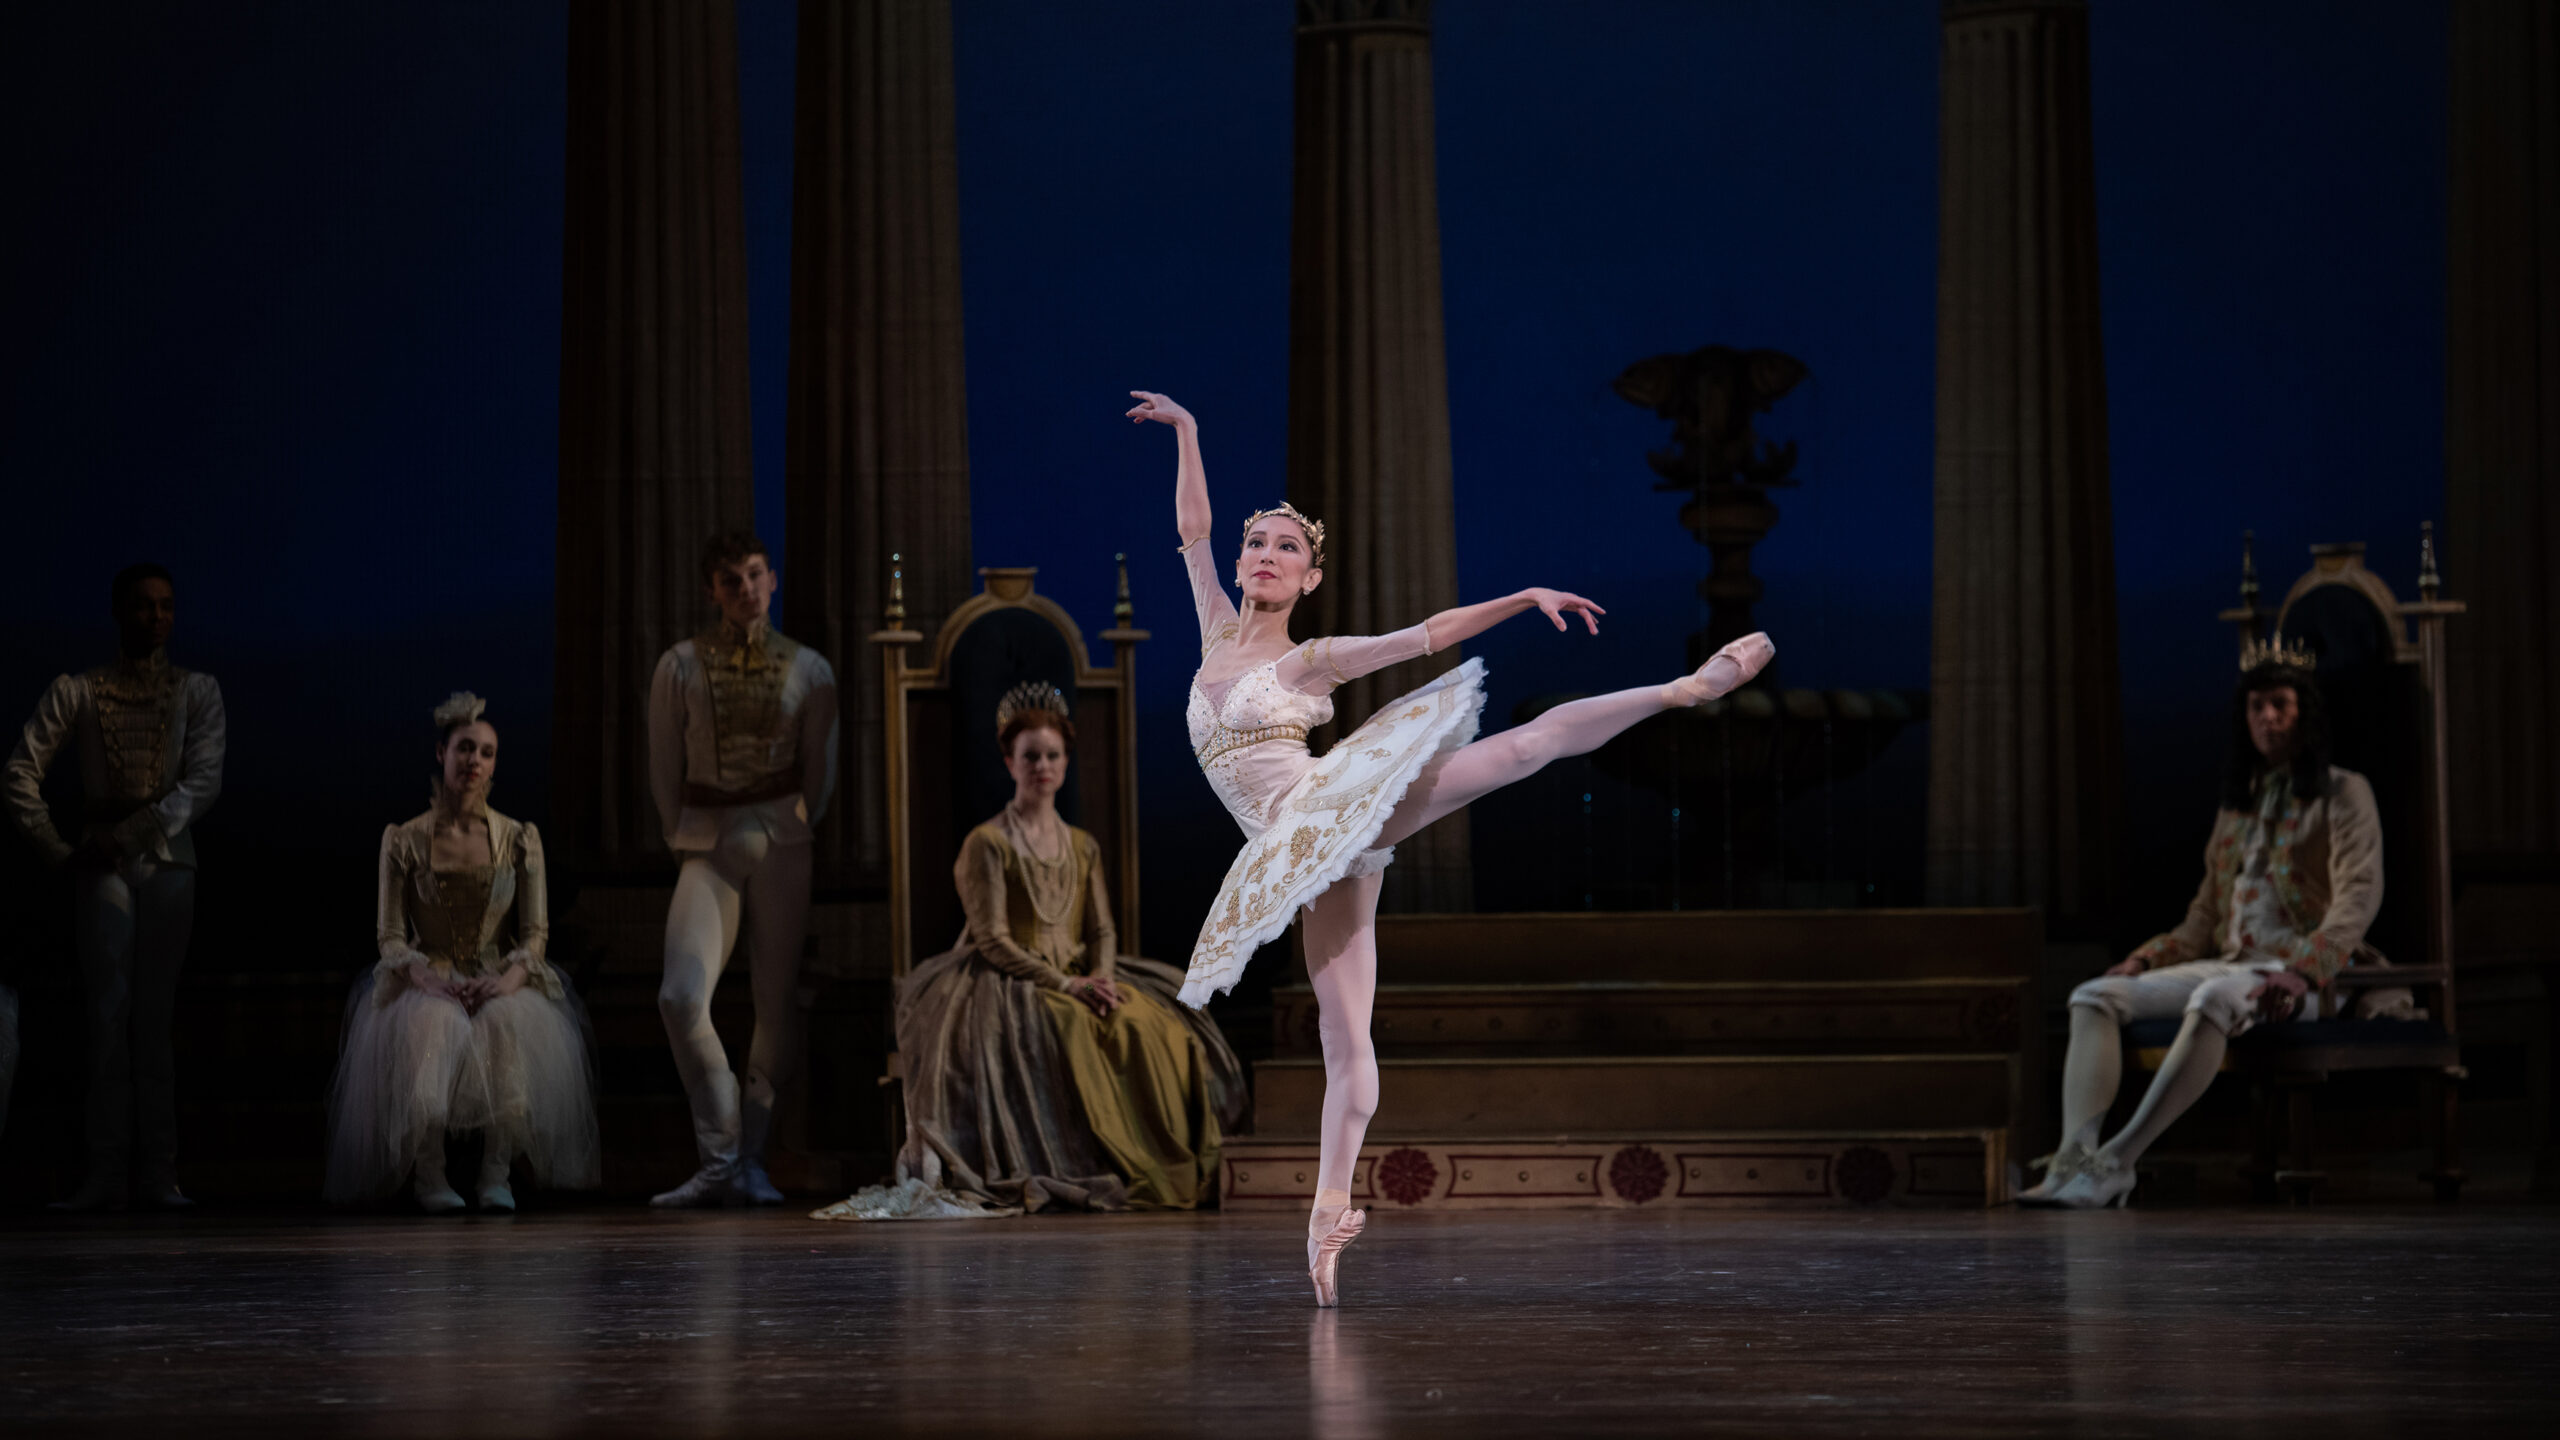 Yuka Iseda does a first arabesque onstage during a performance of Sleeping Beauty, looking out to the audience. She wears a white tutu with gold trim, pink tights and pointe shoes. Behind her, dancers dressed as a medieval royal courtiers sit and watch.